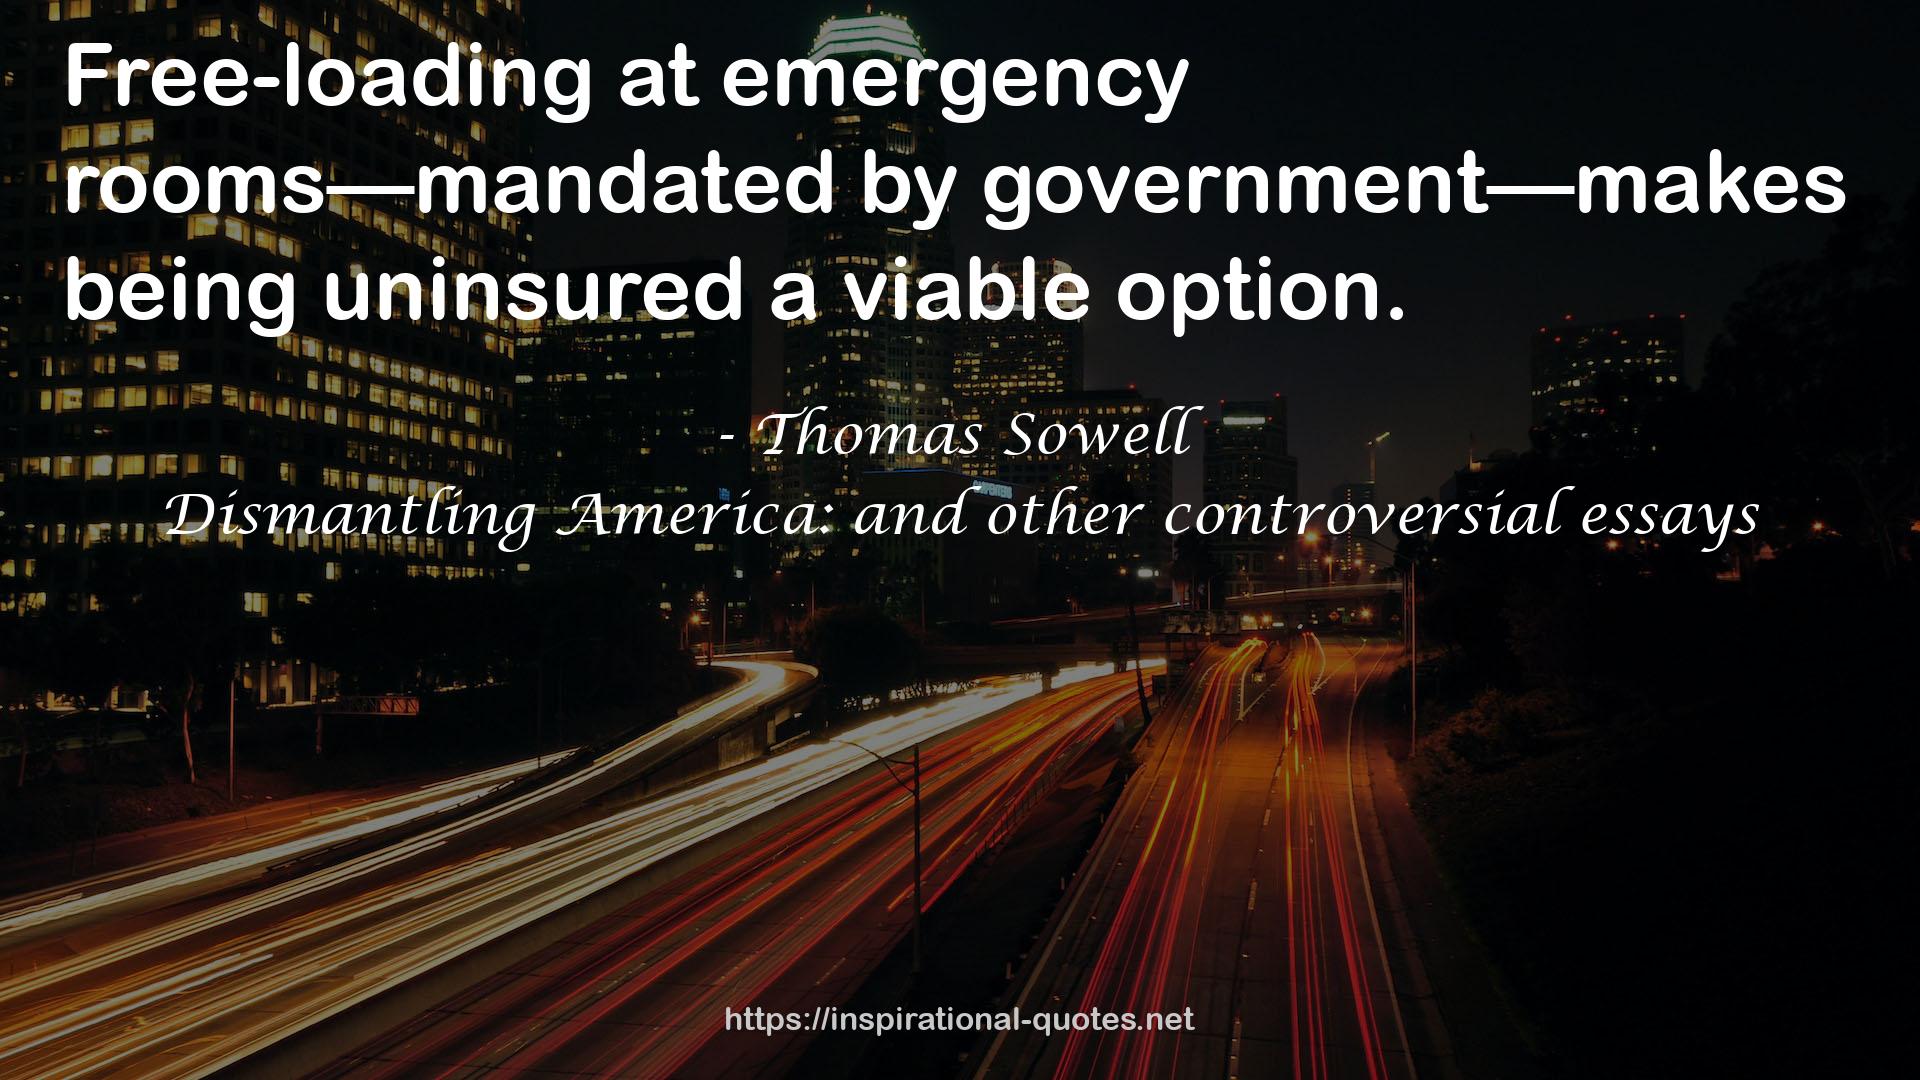 Thomas Sowell QUOTES